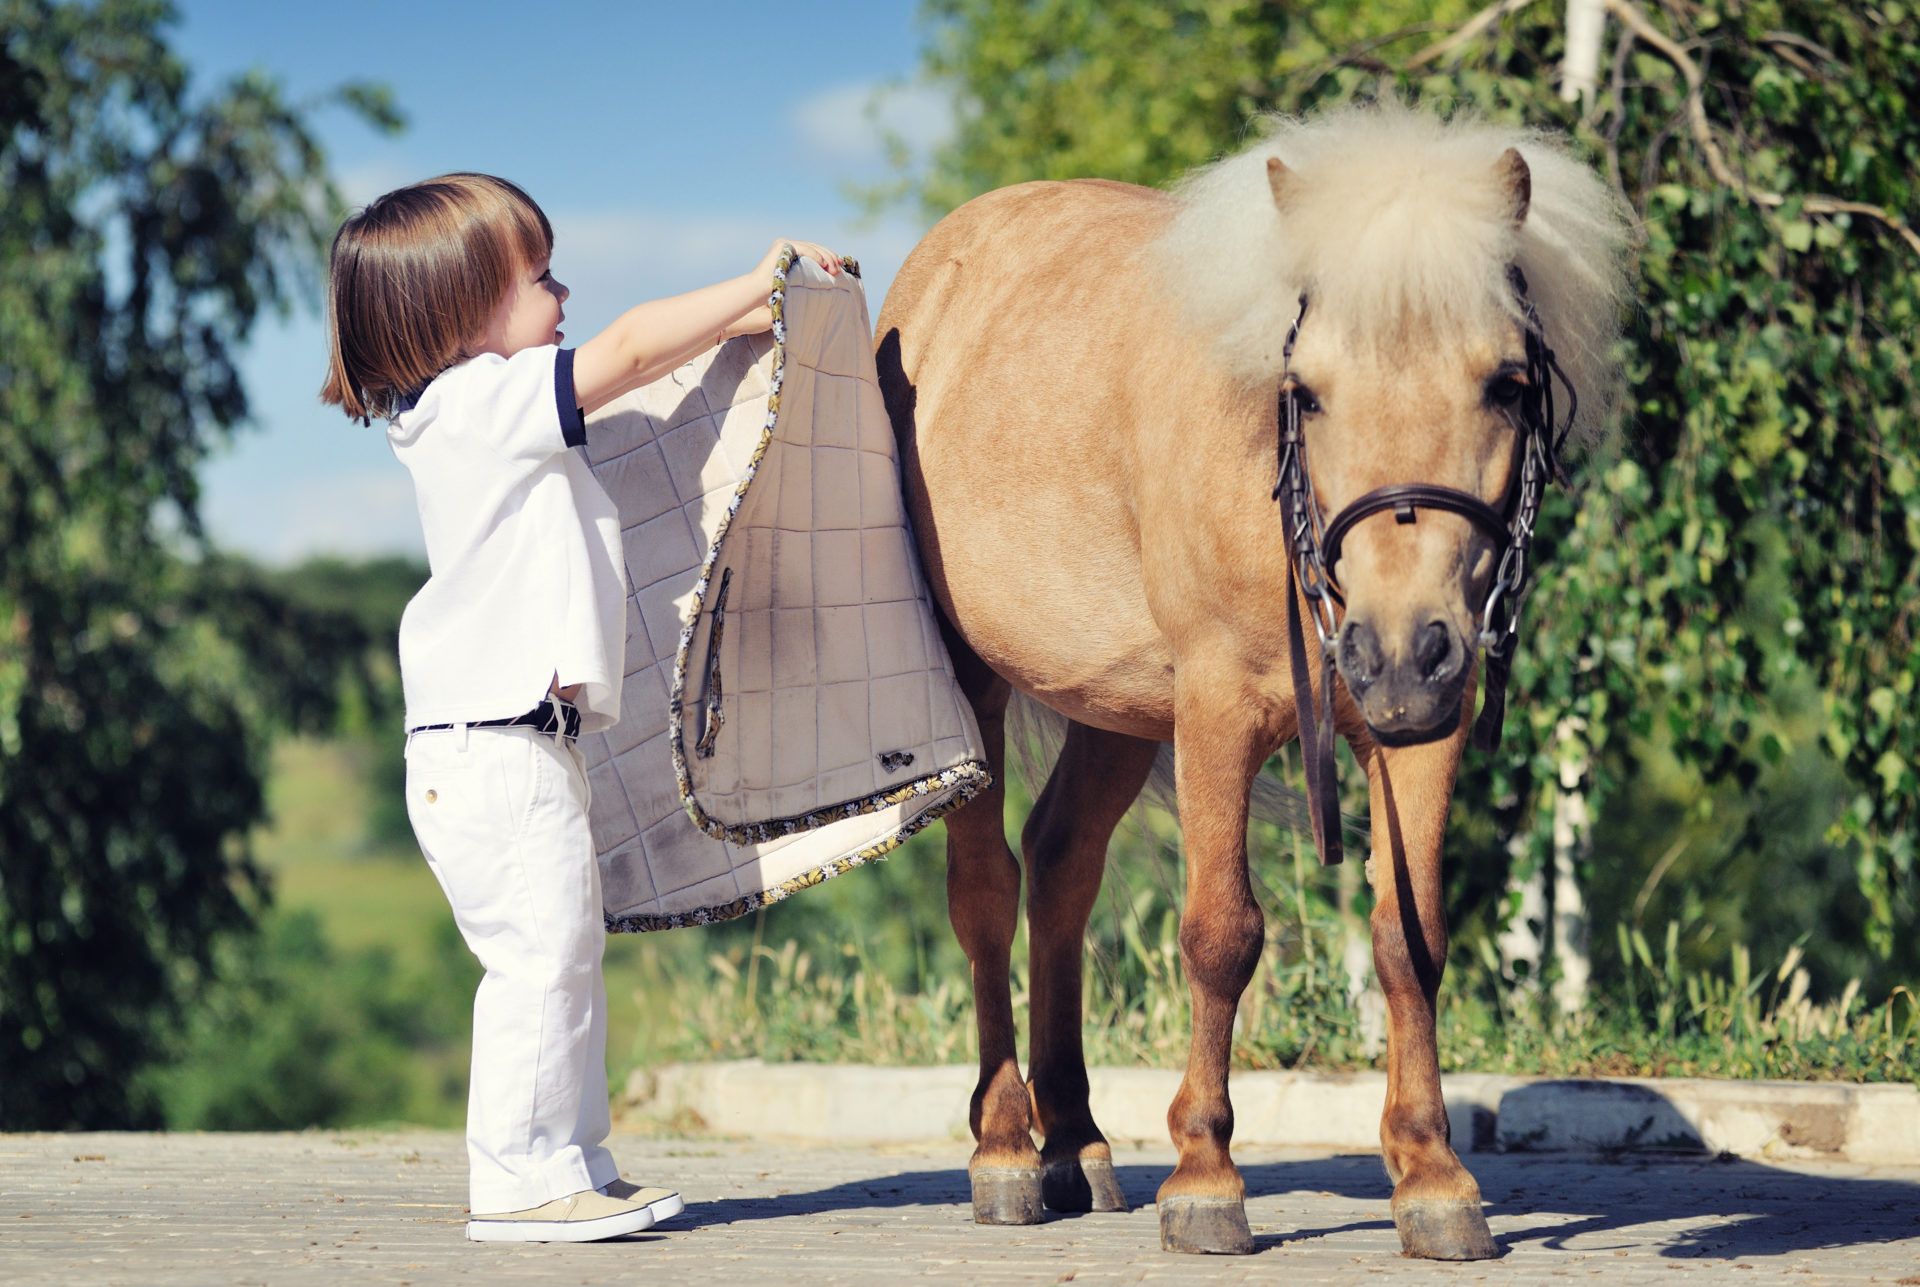 Photograph of a child and a horse